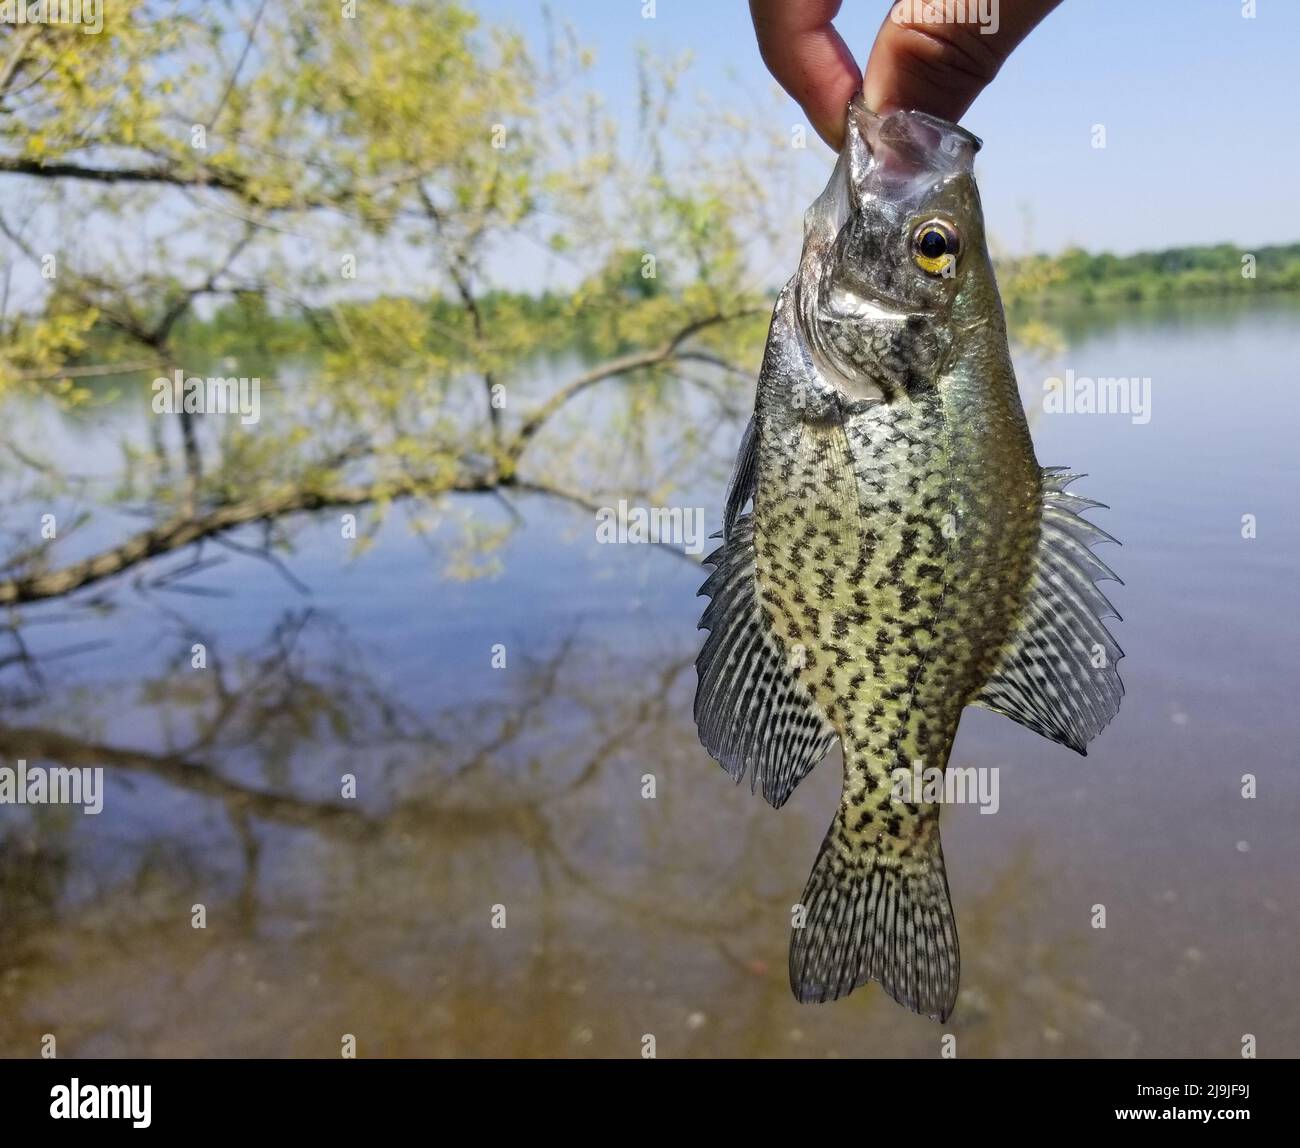 Holding a beautiful crappie before being released in the water Stock Photo